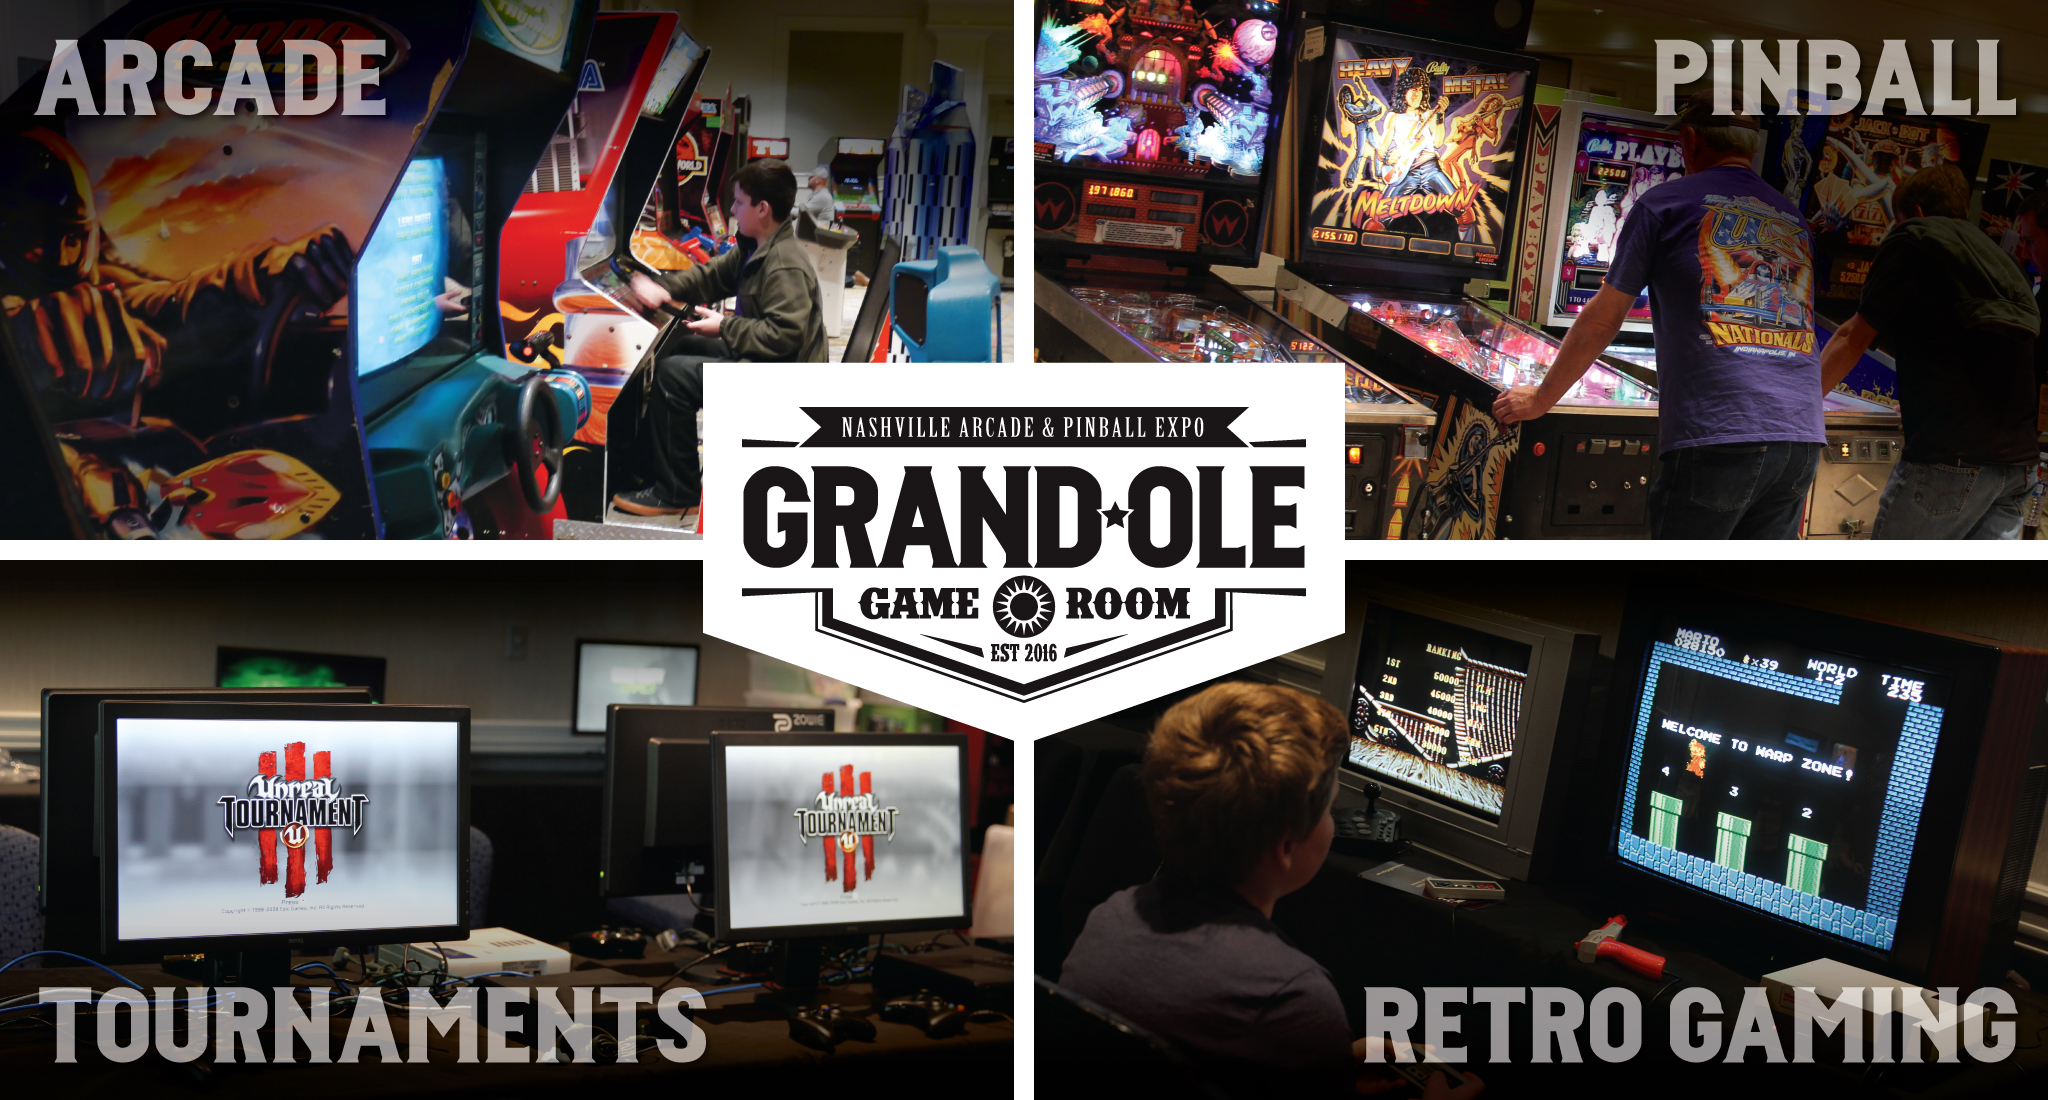 Grand Ole Gameroom Expo This Week In Pinball